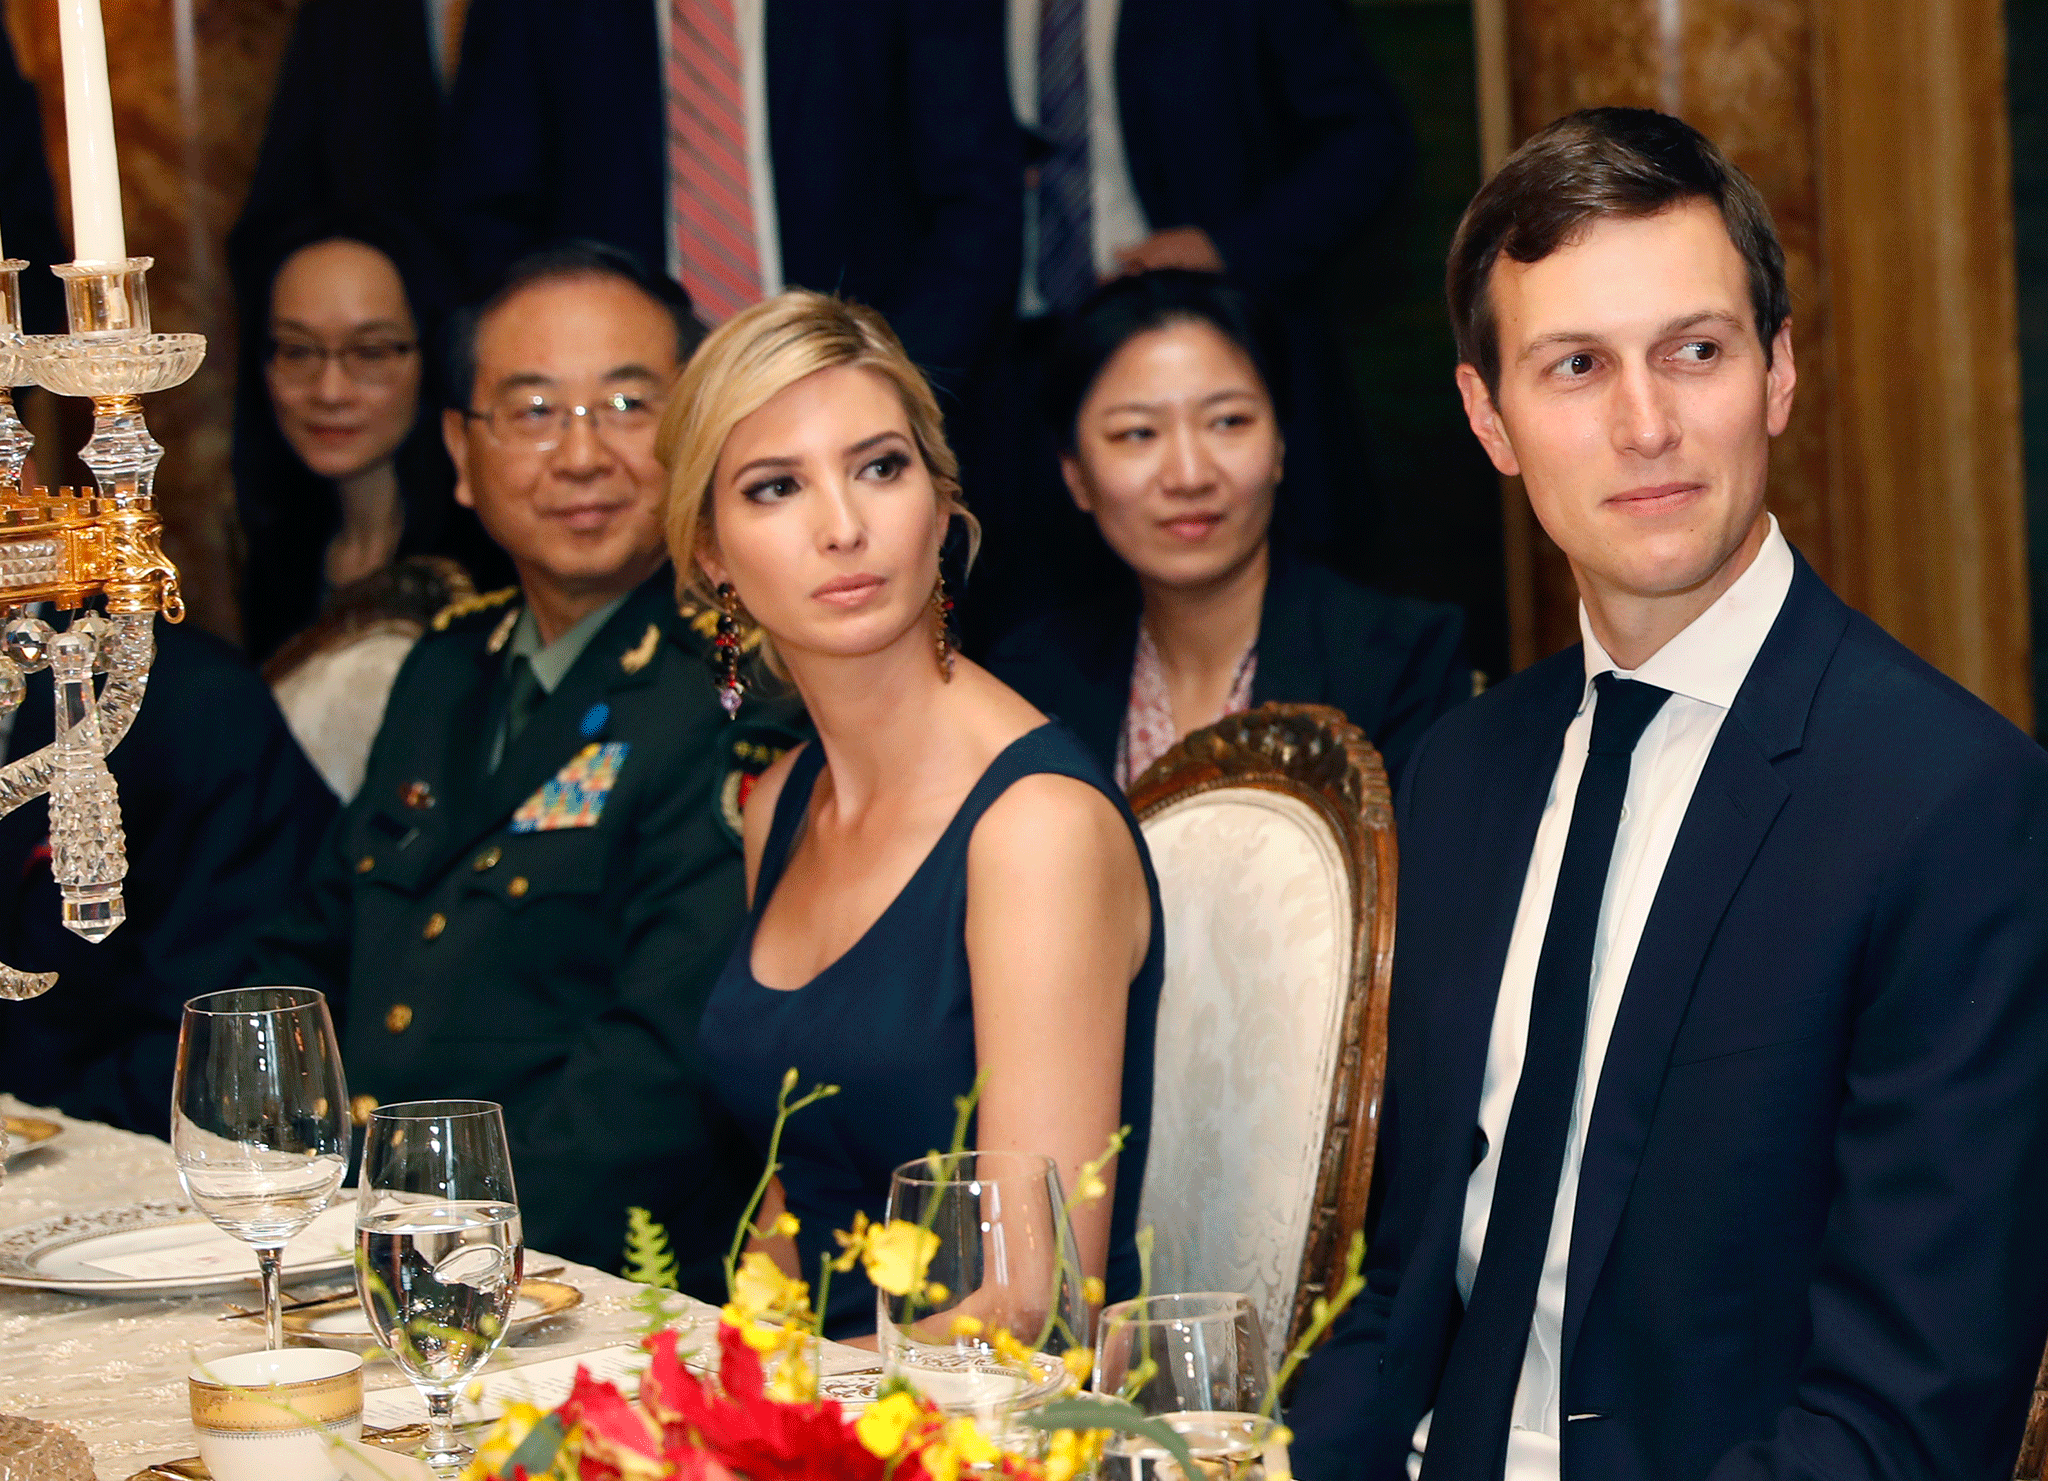 Ivanka Trump wins Chinese trade marks on day she dined with Xi Jinping